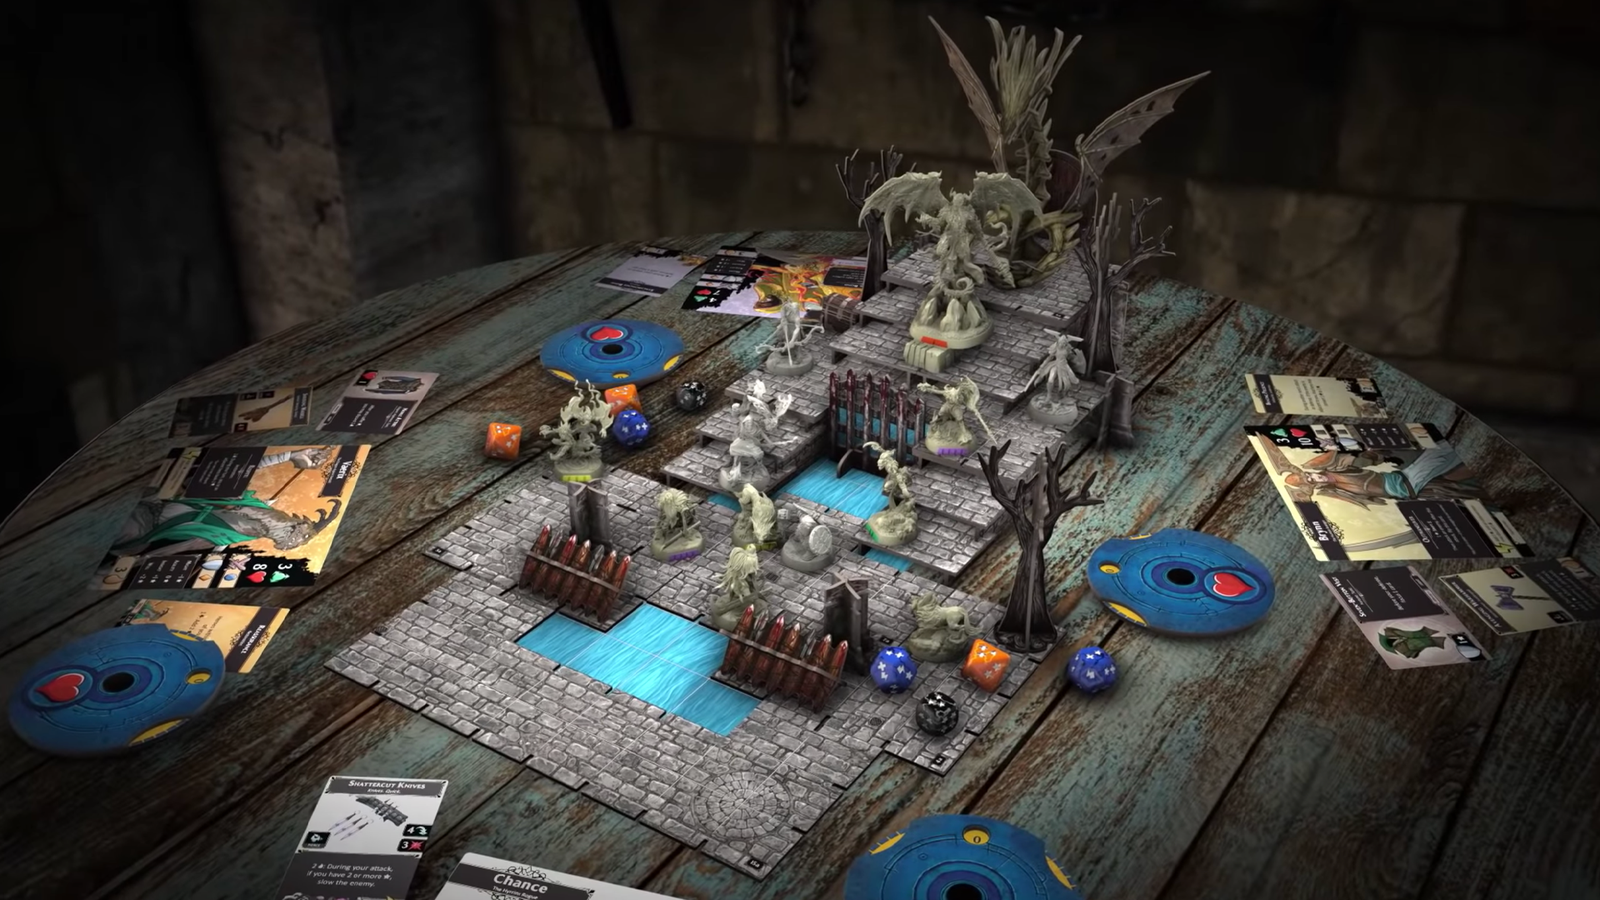 Large Dungeon Gaming Board Compatible with Heroquest - 3D printed - Dragons  Rest